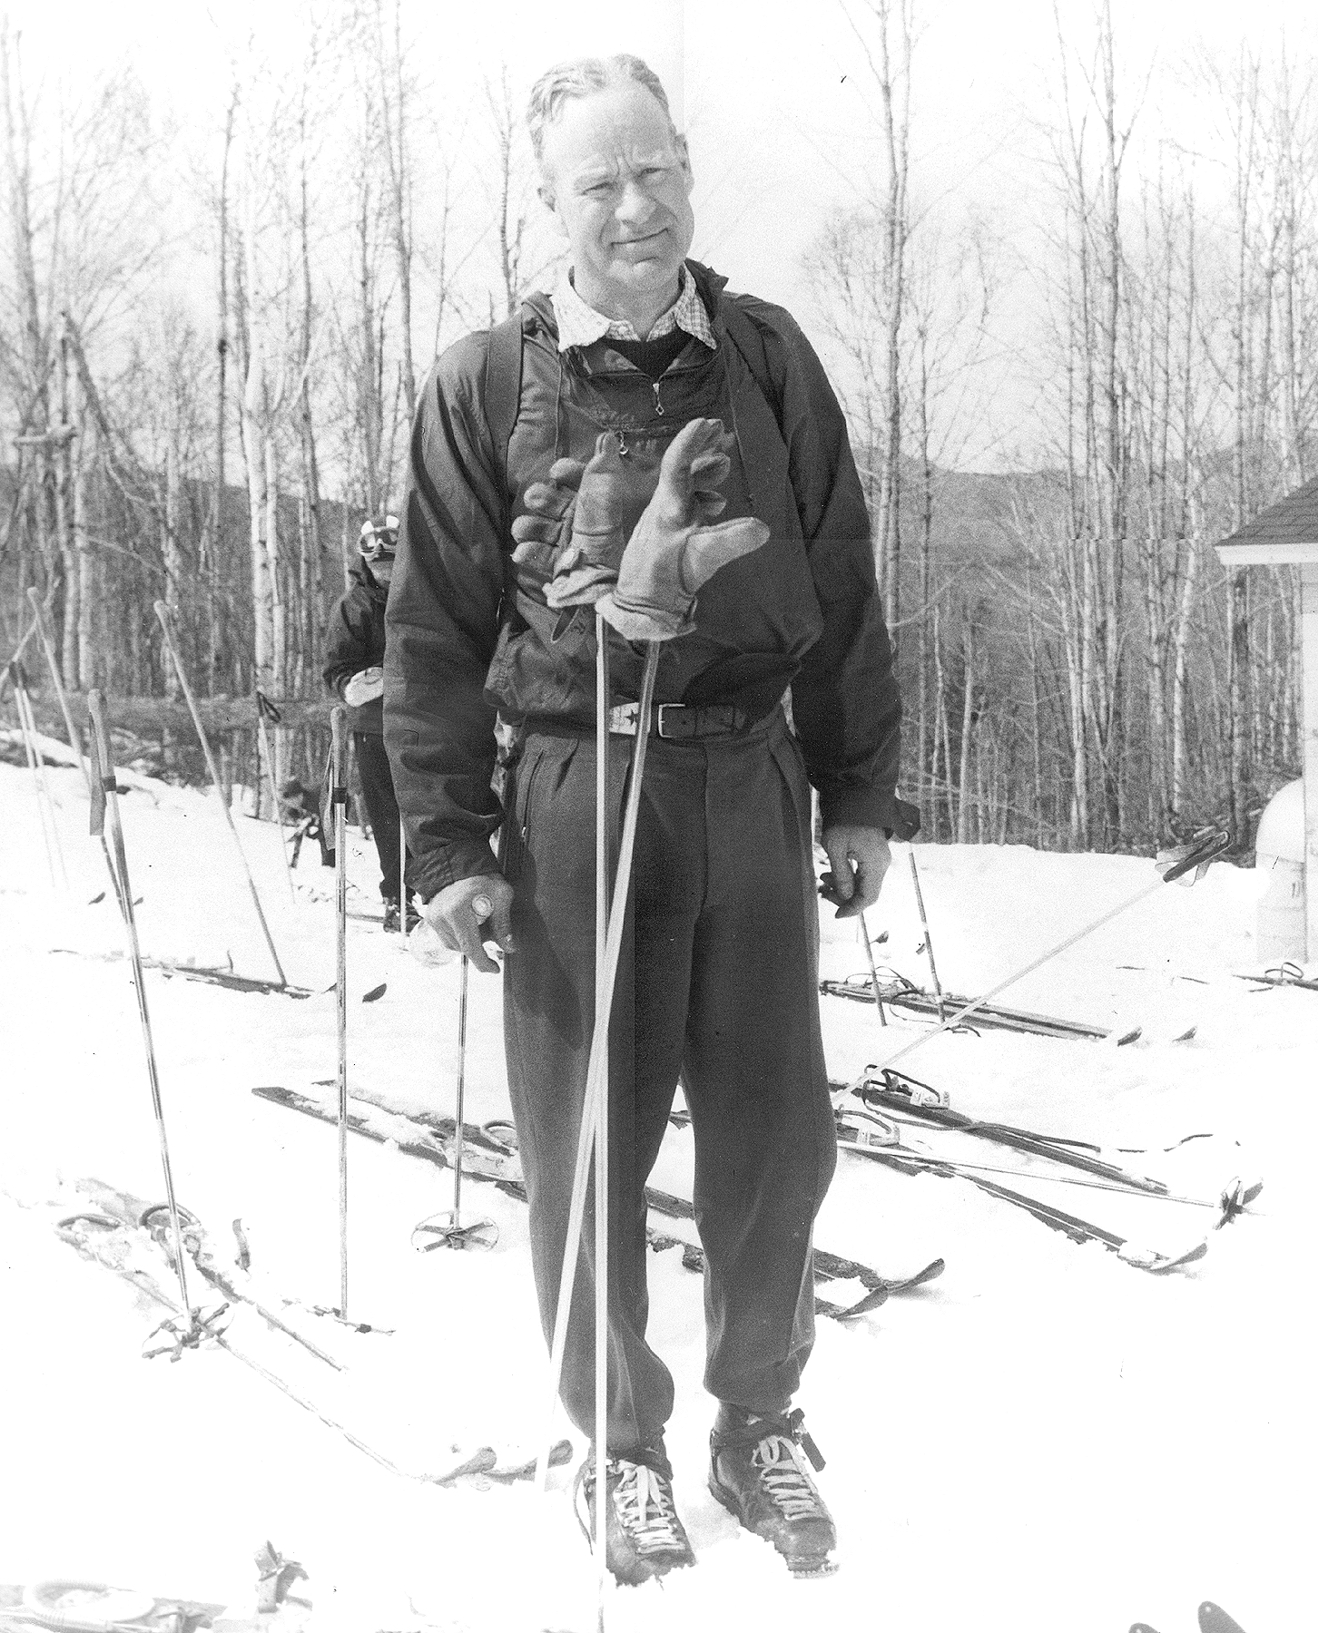 Alexander (Alec) Bright (1897-1980) was an Olympic skier who participated in the February 1940 meeting in a Vermont inn that discussed the need for an American mountain unit. Born in Cambridge, Massachusetts, in 1897, Bright was one of the top alpine skiers in the eastern United States during the 1930s and an instrumental force in the nascent sport of ski racing. A Harvard graduate, he won the United States Eastern Amateur Ski Association (USEASA) downhill championship in 1935 and competed in the downhill race in the 1936 Winter Olympics in Garmisch, Germany as a member of the US Olympic Team. A charter member of the Hochgebirge Ski Club and Woodstock Ski Runners Club, Bright became involved with Eastern (as USEASA was known) and the National Ski Association following the Olympics. Picked by Minnie Dole to serve as a charter member of the National Ski Patrol System, Bright also served on the Olympic Selection Committee in 1939 before enlisting with the U.S. Army Air Corps during World War II. His European tour of duty with the 91st Bombardment Group saw him promoted first to captain and later to major. Upon his return from the war, he served as an Olympic Team committee member and on the Olympic Selection Committee in 1948 and 1952. He was also elected vice-president of the National Ski Association and served on the finance committee for a number of years. He was elected to the U.S. National Ski Hall of Fame in 1959.